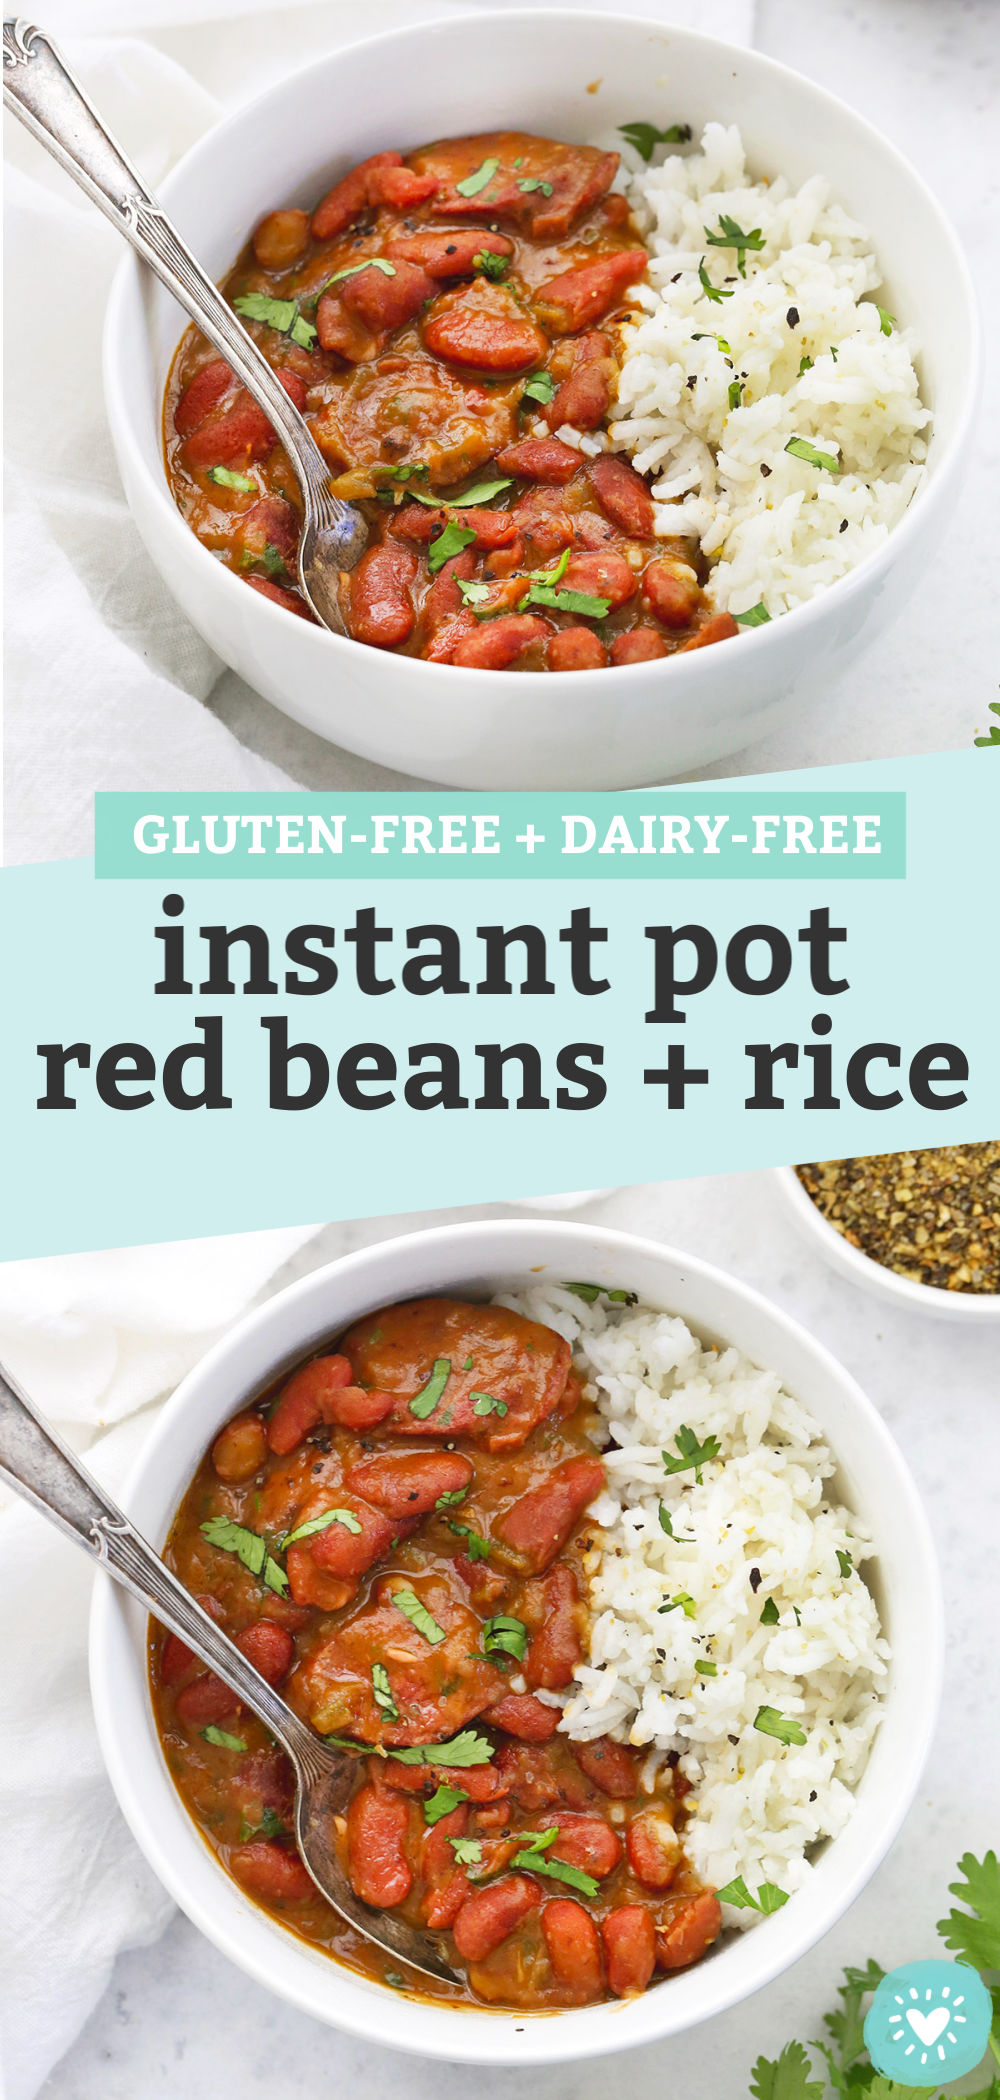 Collage of images of Instant Pot Red Beans and Rice in a bowl garnished with fresh herbs with text that reads "Gluten-Free + Dairy-free instant pot red beans + rice"